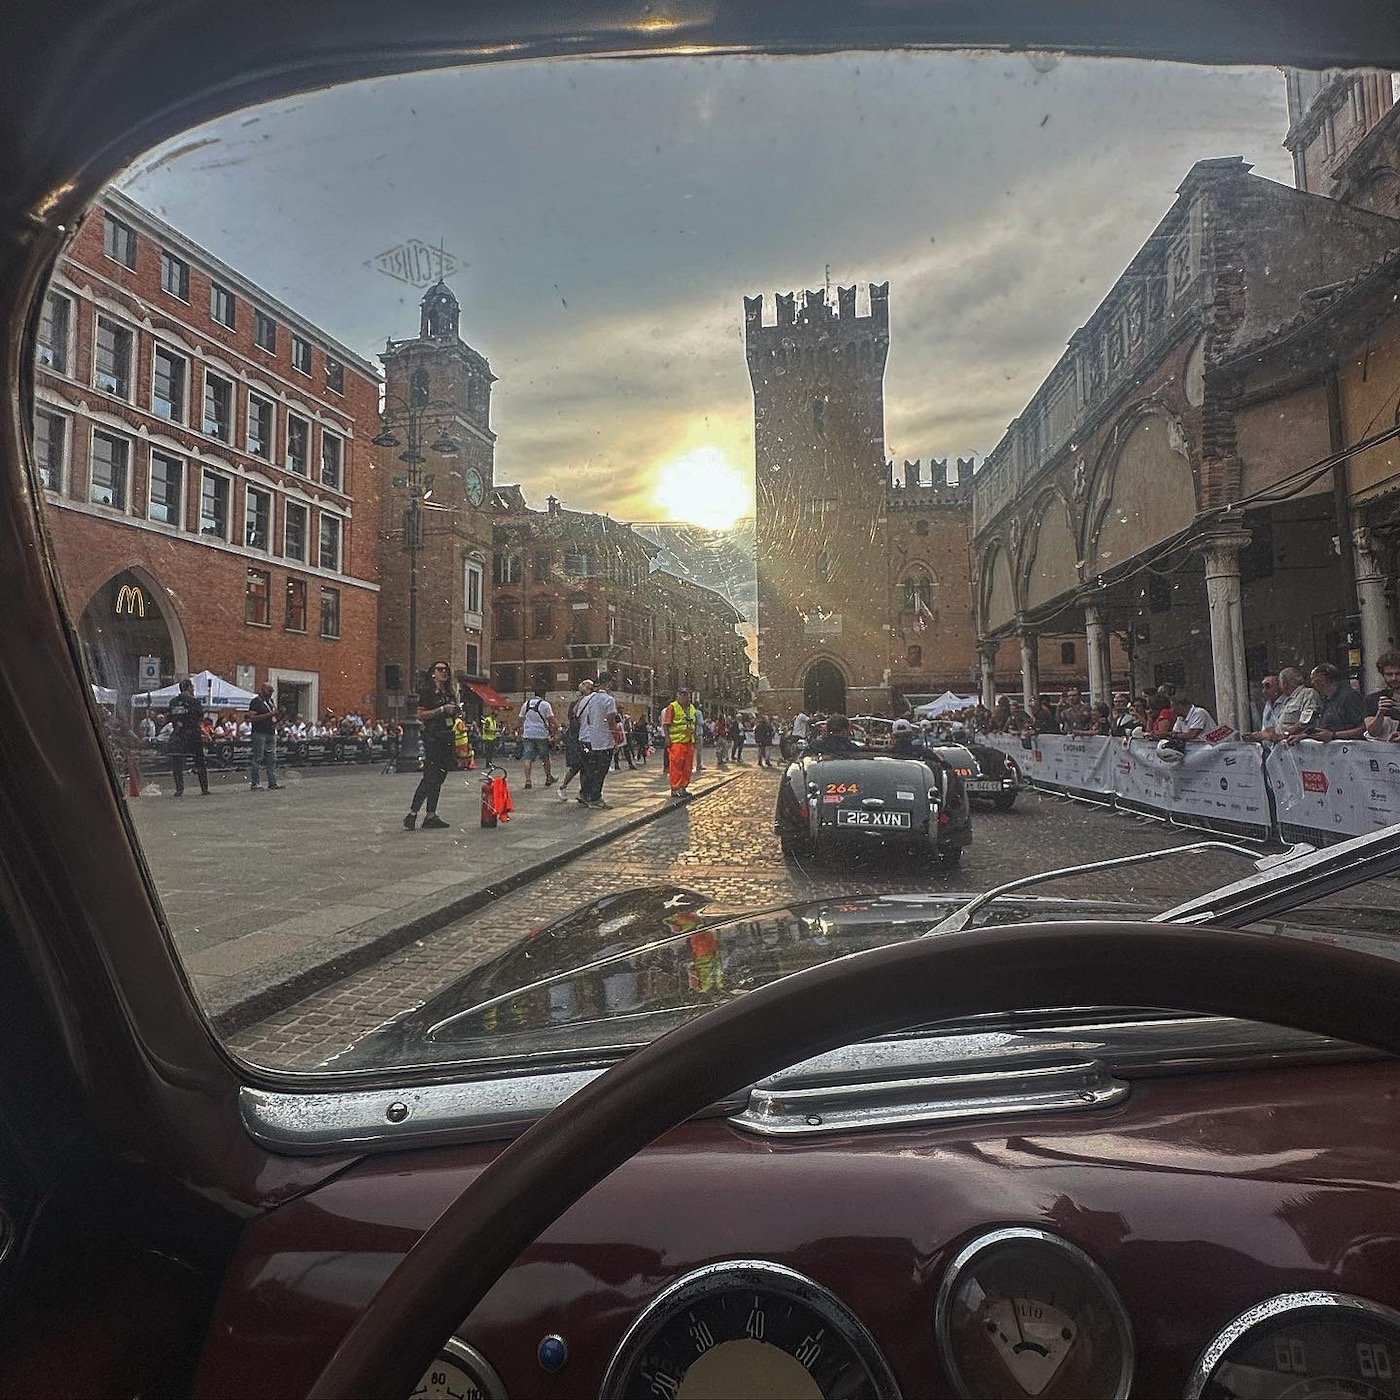 Mille Miglia: a country united